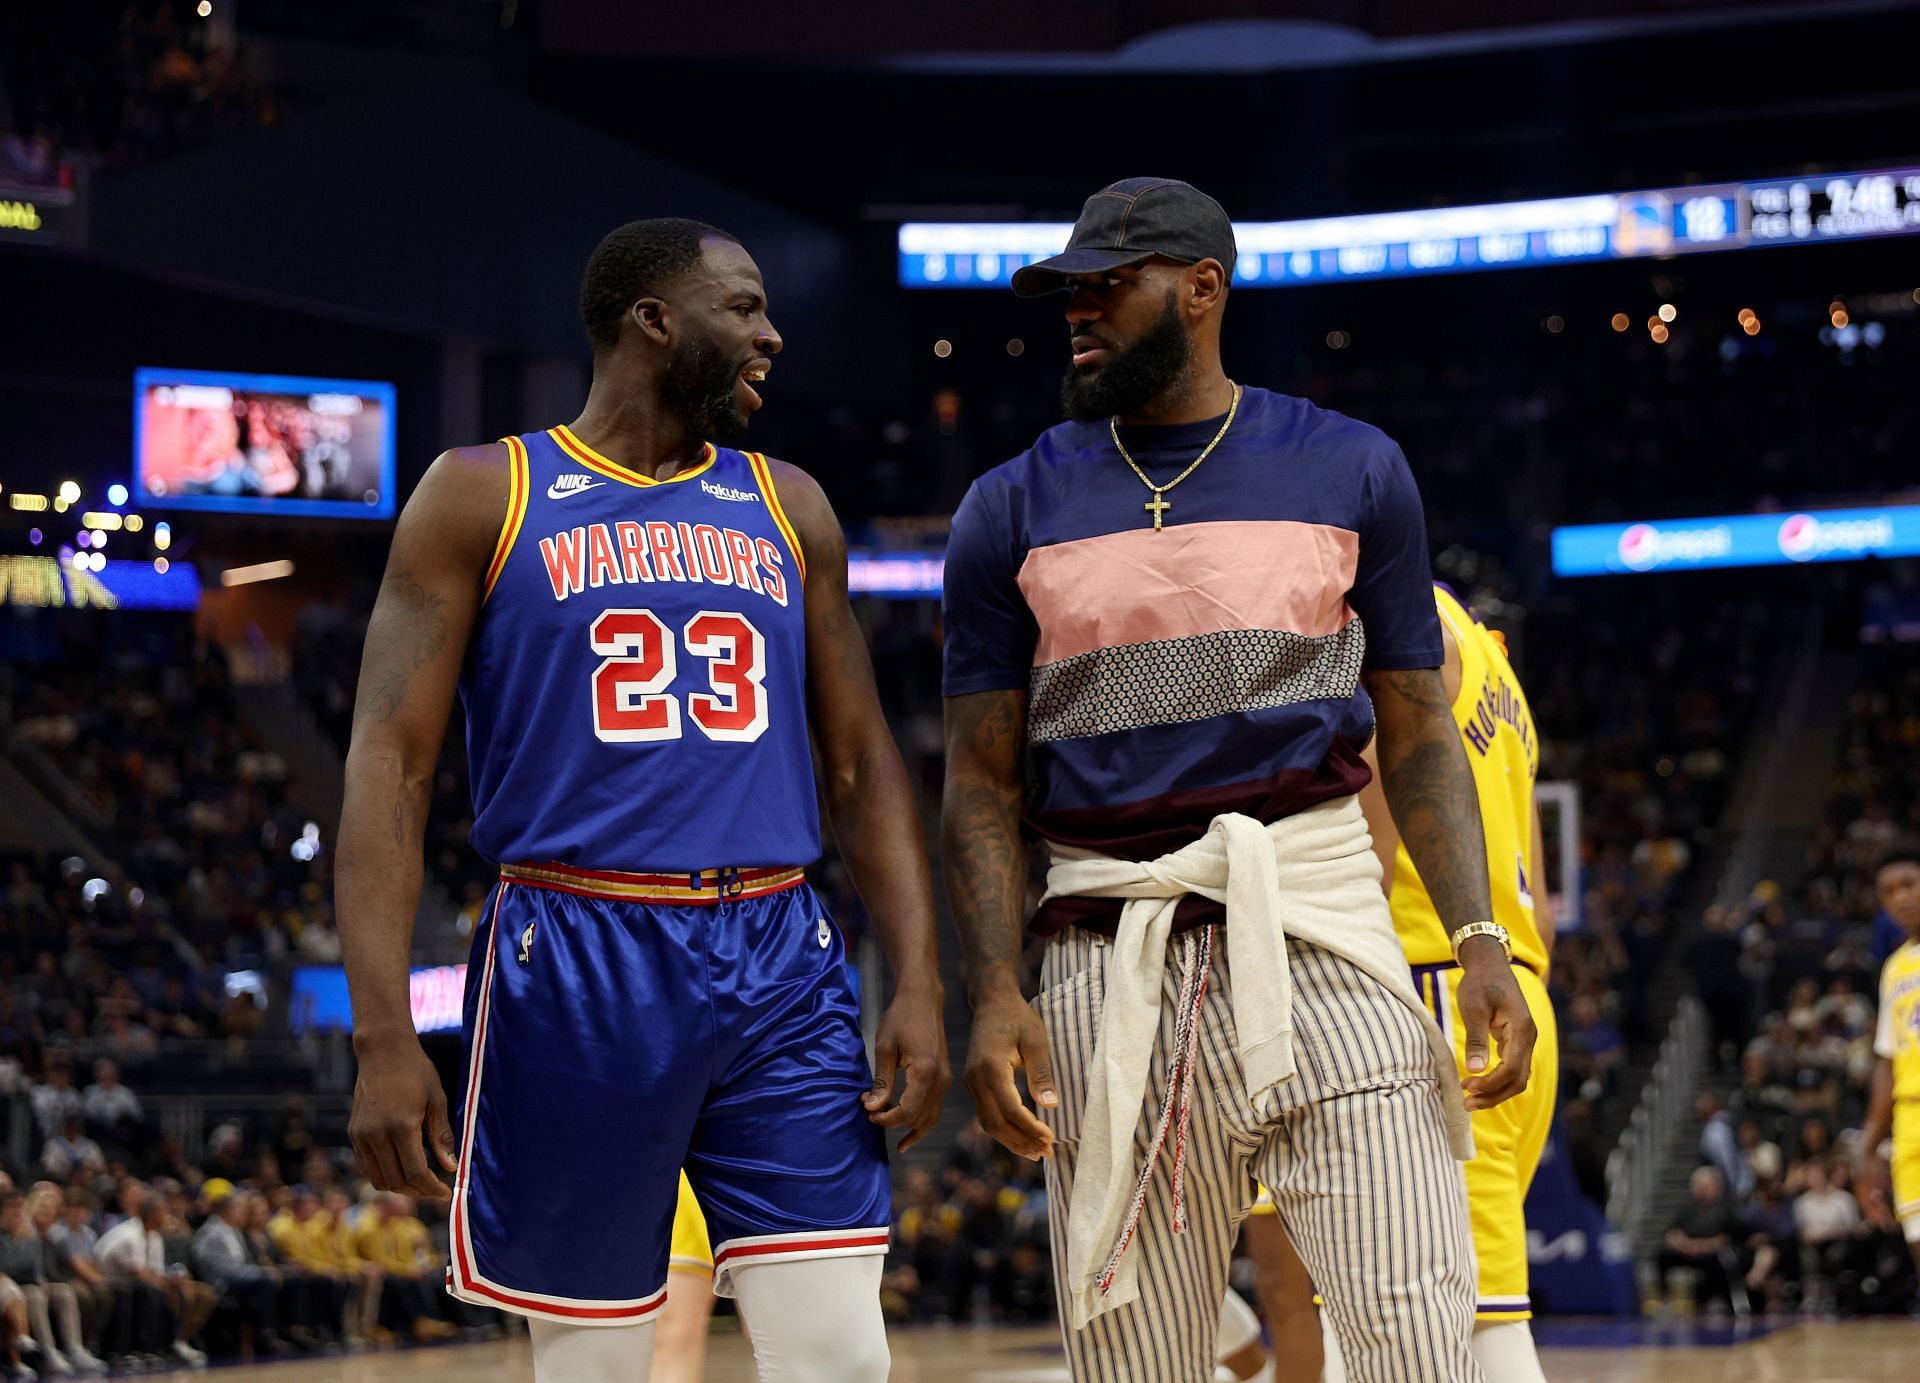 Draymond Green of the Golden State Warriors talks with then-injured LeBron James of the Los Angeles Lakers.